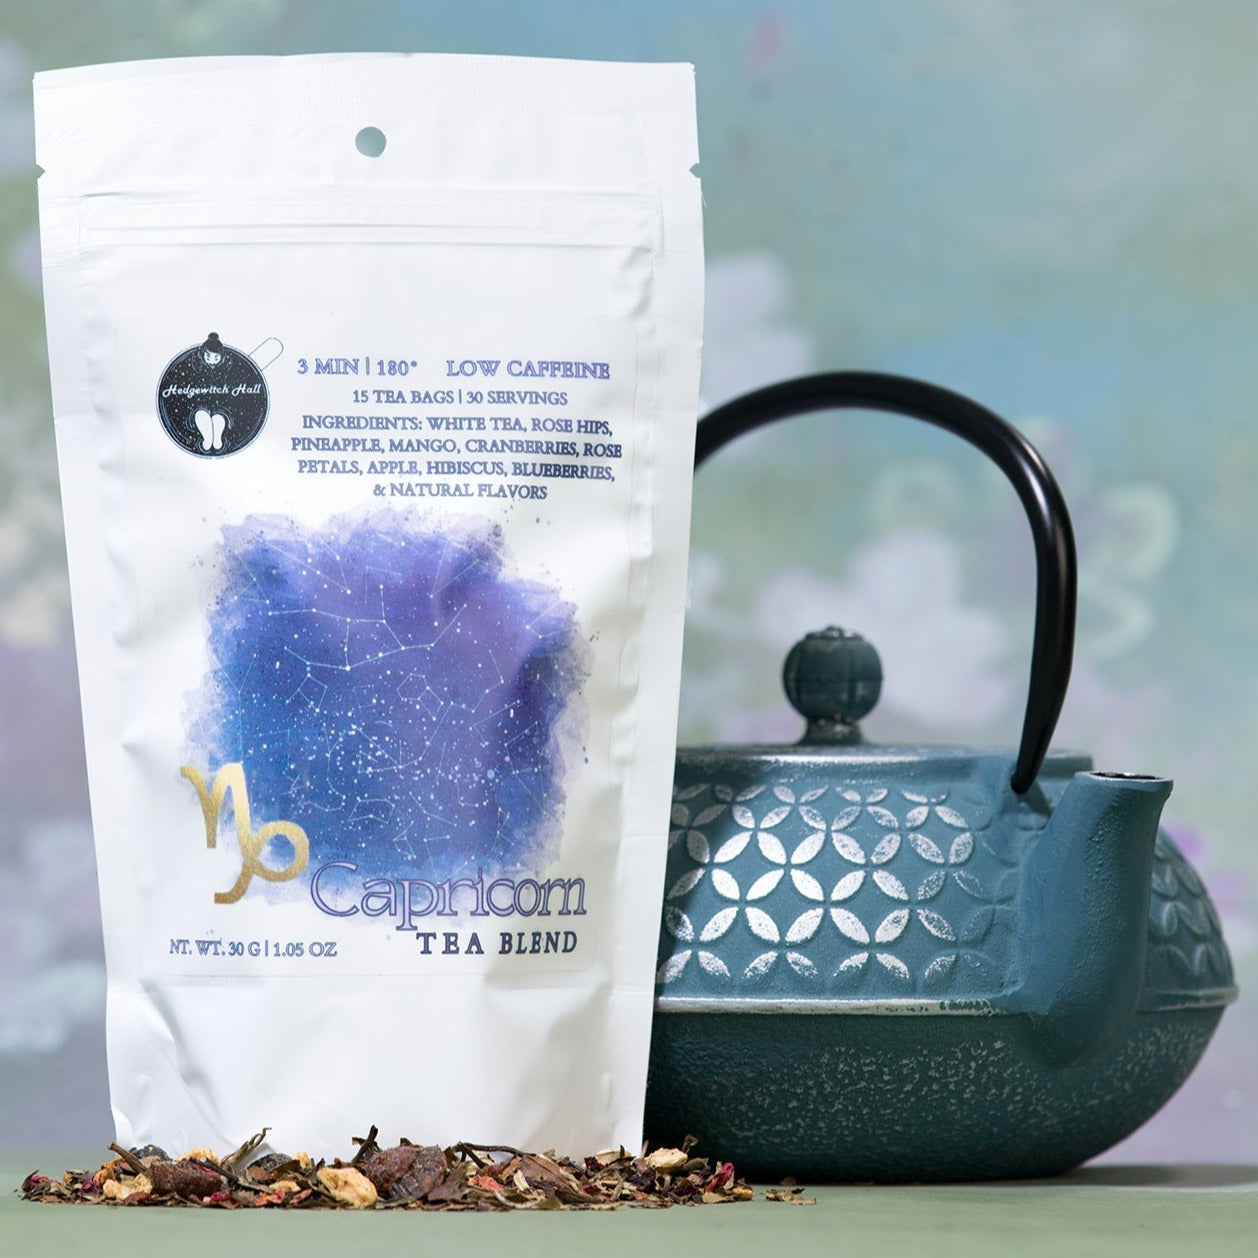 Product photo of Capricorn tea blend and teal teapot.